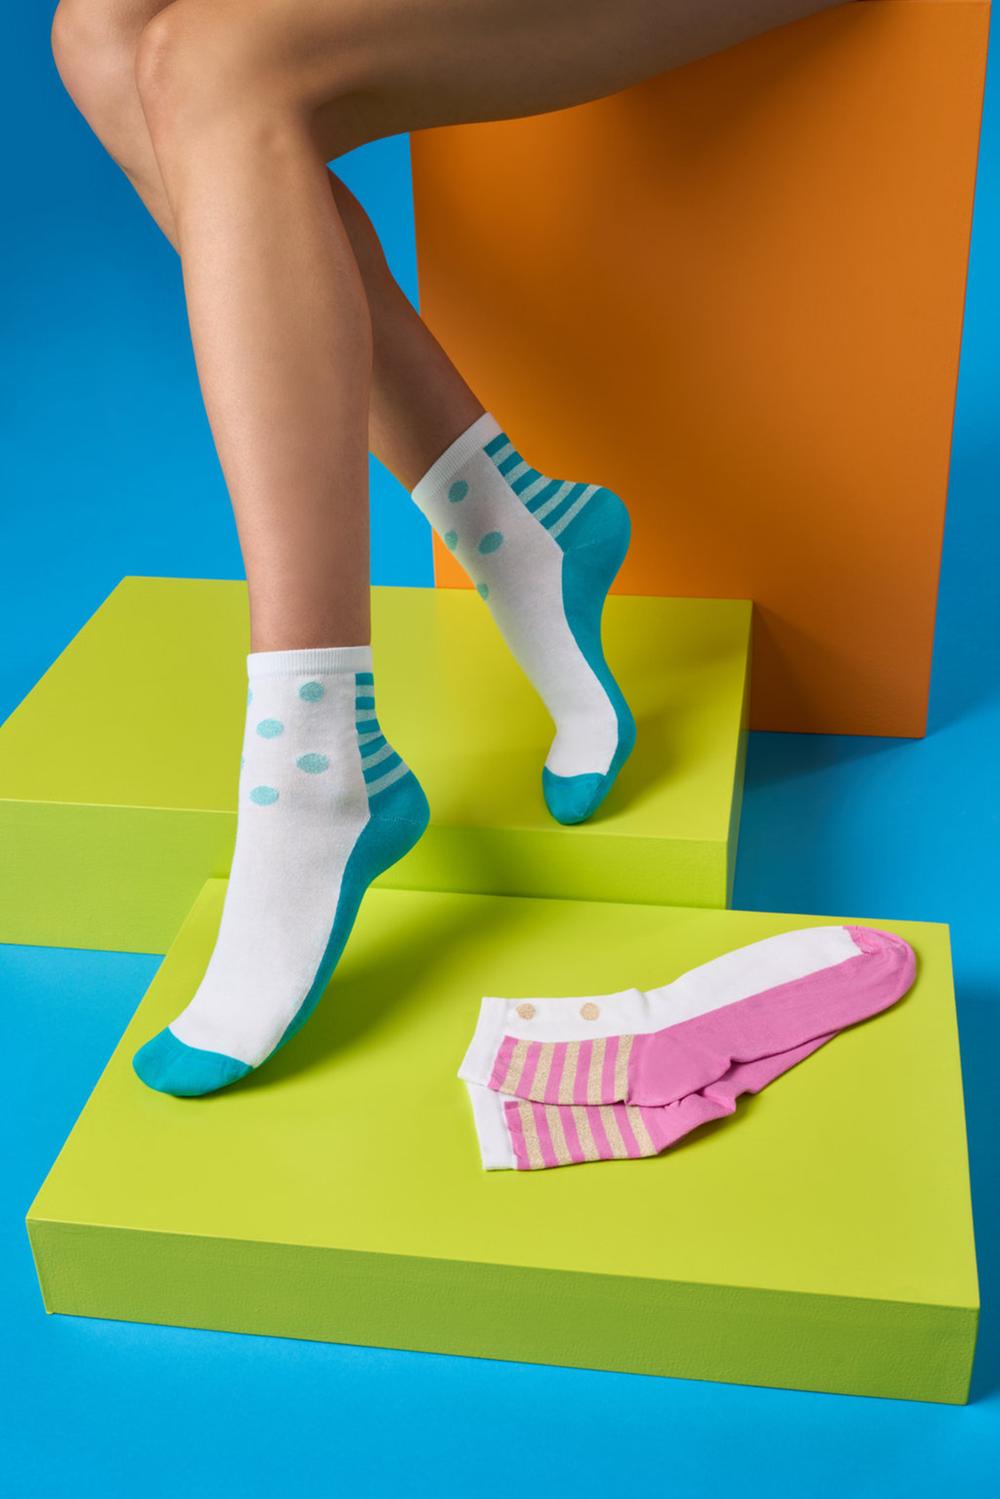 SiSi Union Calzino - White quarter high cotton ankle socks with polka dot and stripe pattern with lamé detailing, plain cuff, available in pink/gold and turquoise.